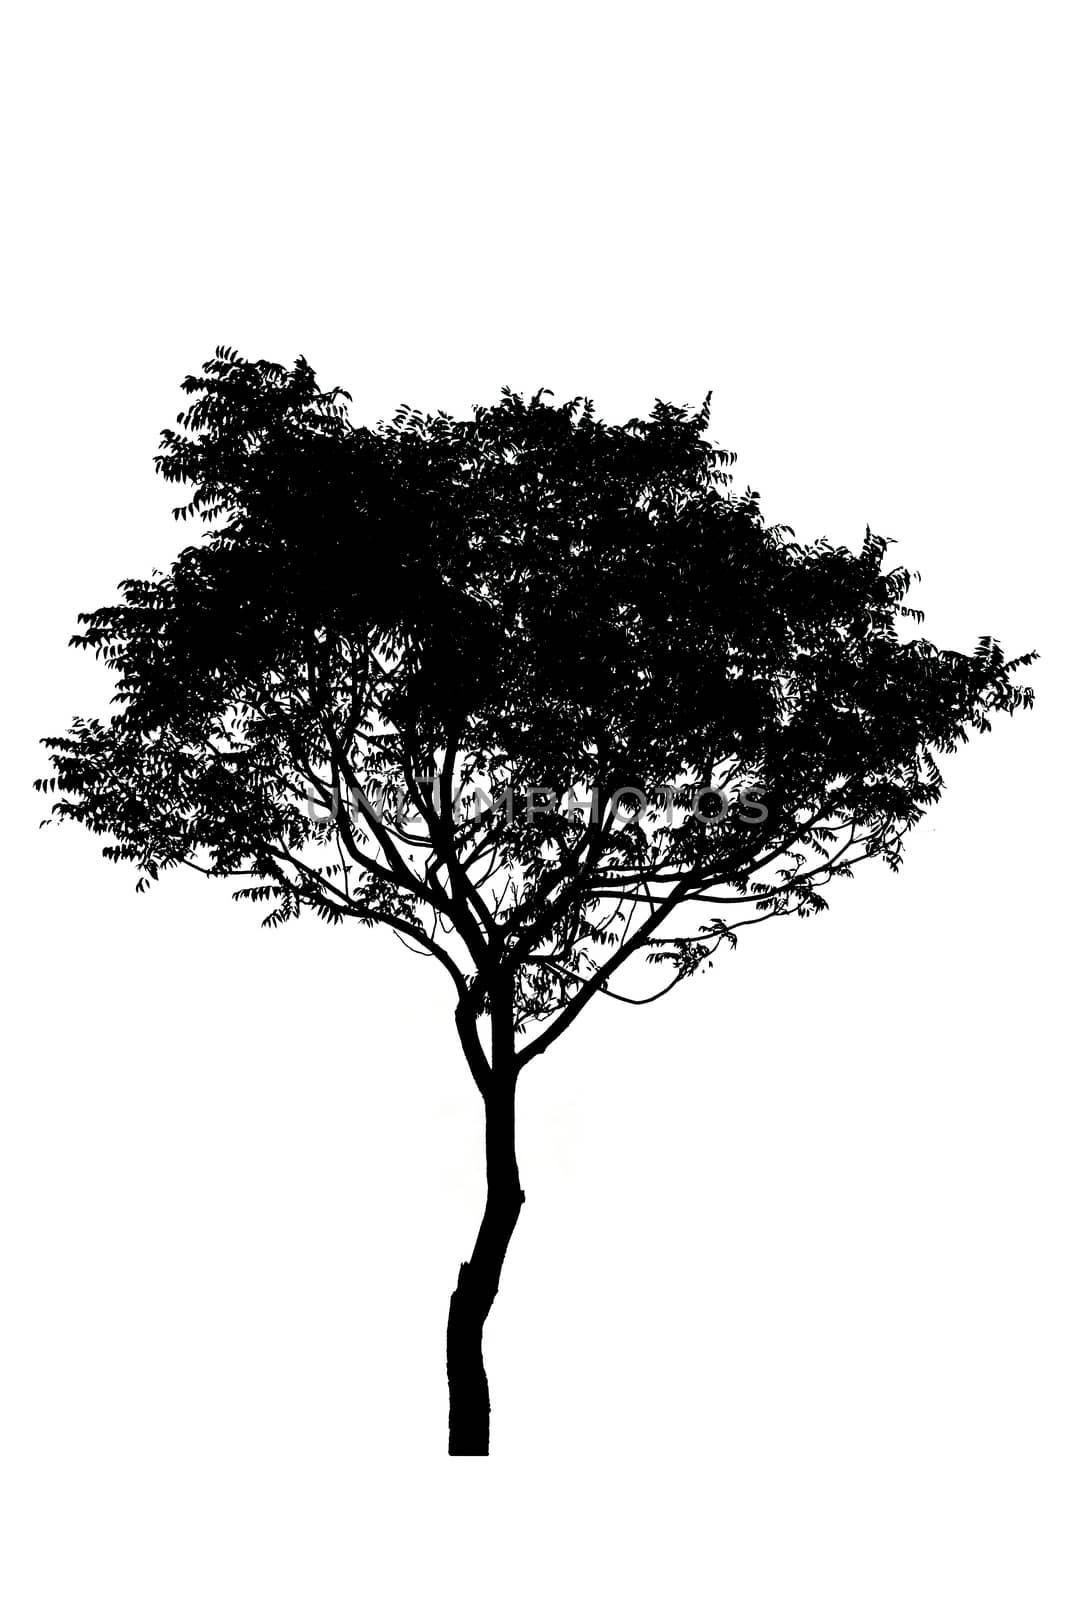 silhouette of tree isolated on white background 